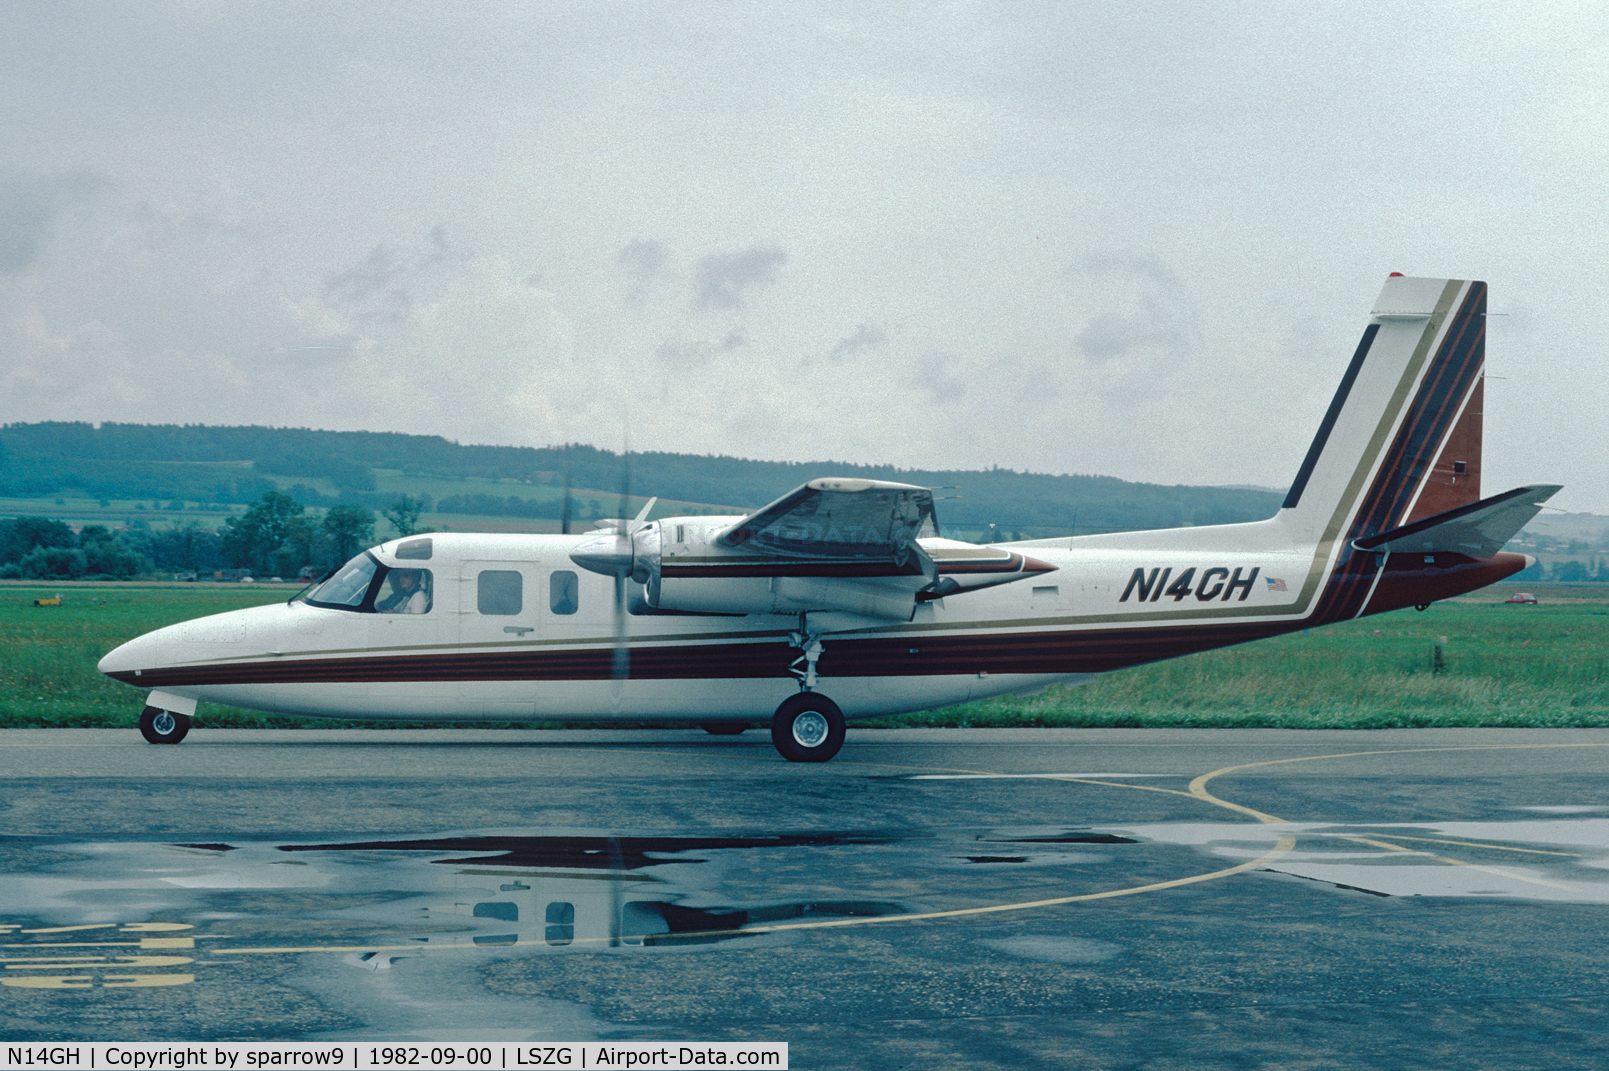 N14GH, 1975 Rockwell 690A Turbo Commander Turbo Commander C/N 11255, Deregistered to Colombia. At Grenchen airport. Scanned from a slide.